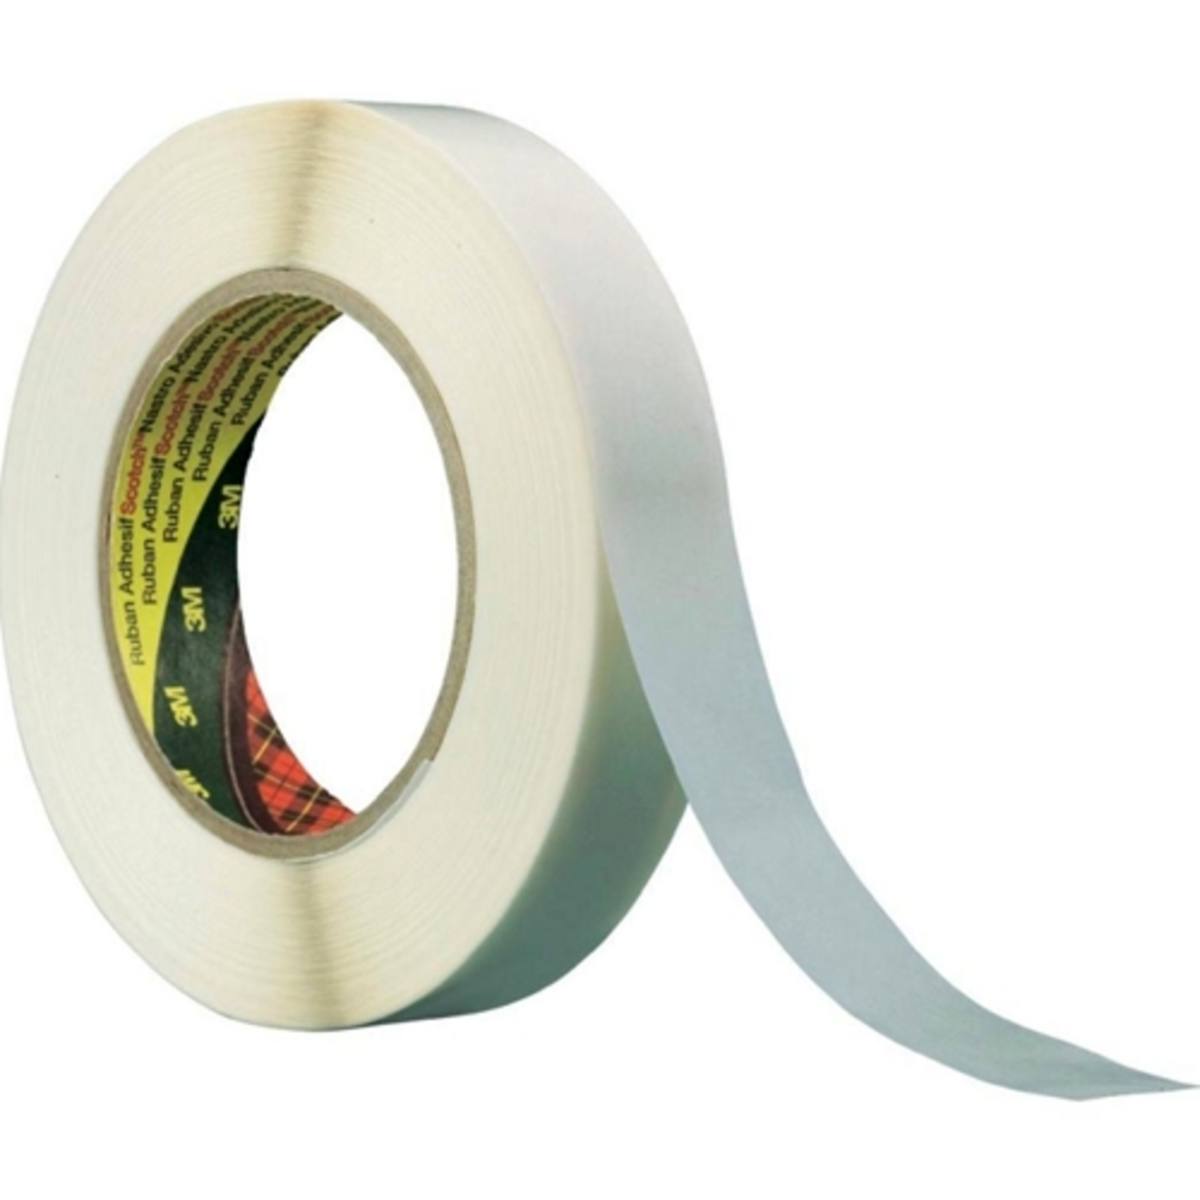 3M Double-sided adhesive tape with non-woven paper backing 9040, cream-colored, 1000 mm x 50 m, 0.1 mm